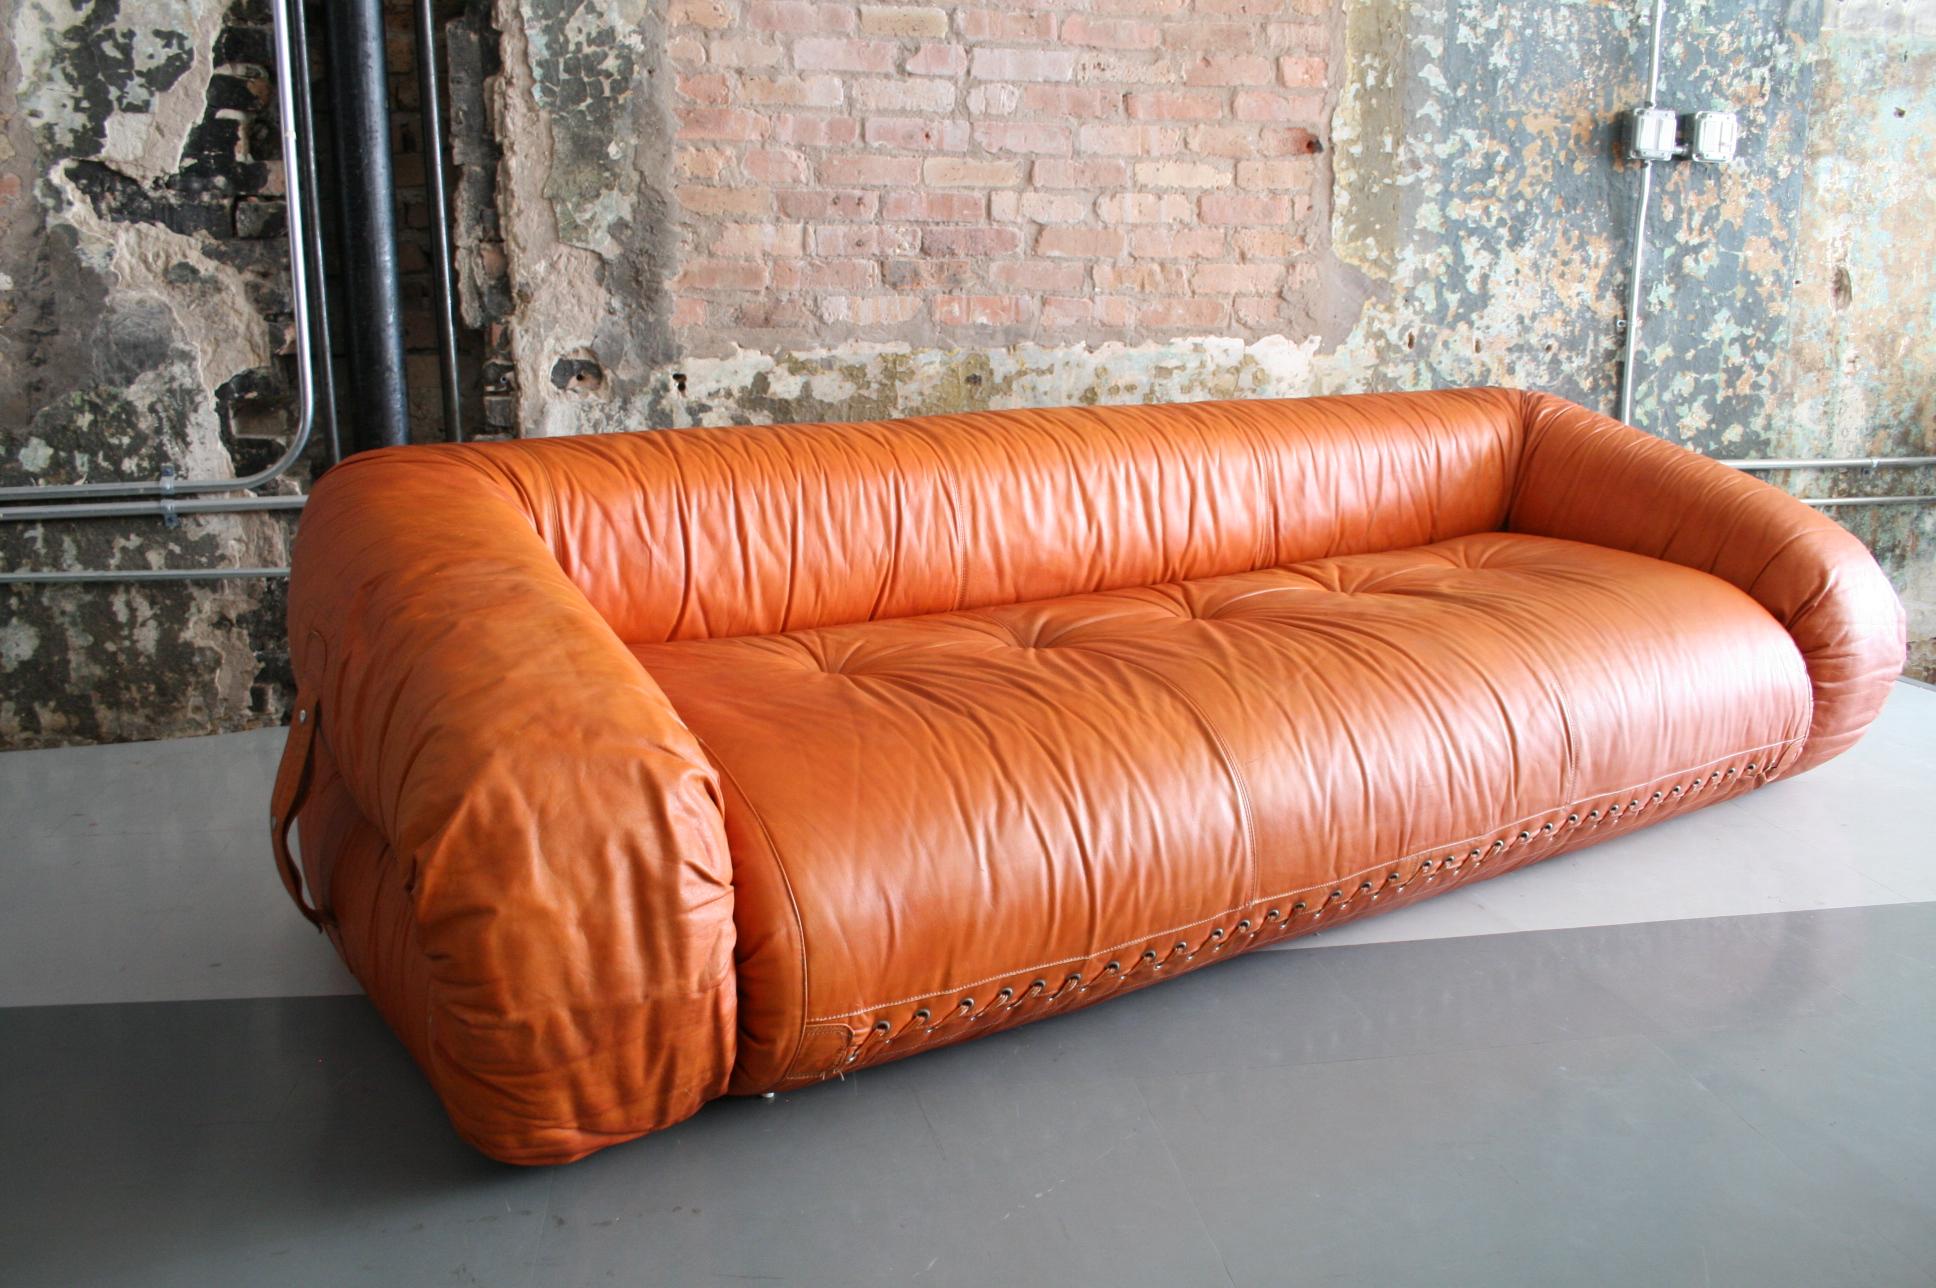 Leather Anfibio Sofa / Bed by Alessandro Becchi for Giovannetti Collezioni, 1971 (Moderne der Mitte des Jahrhunderts)